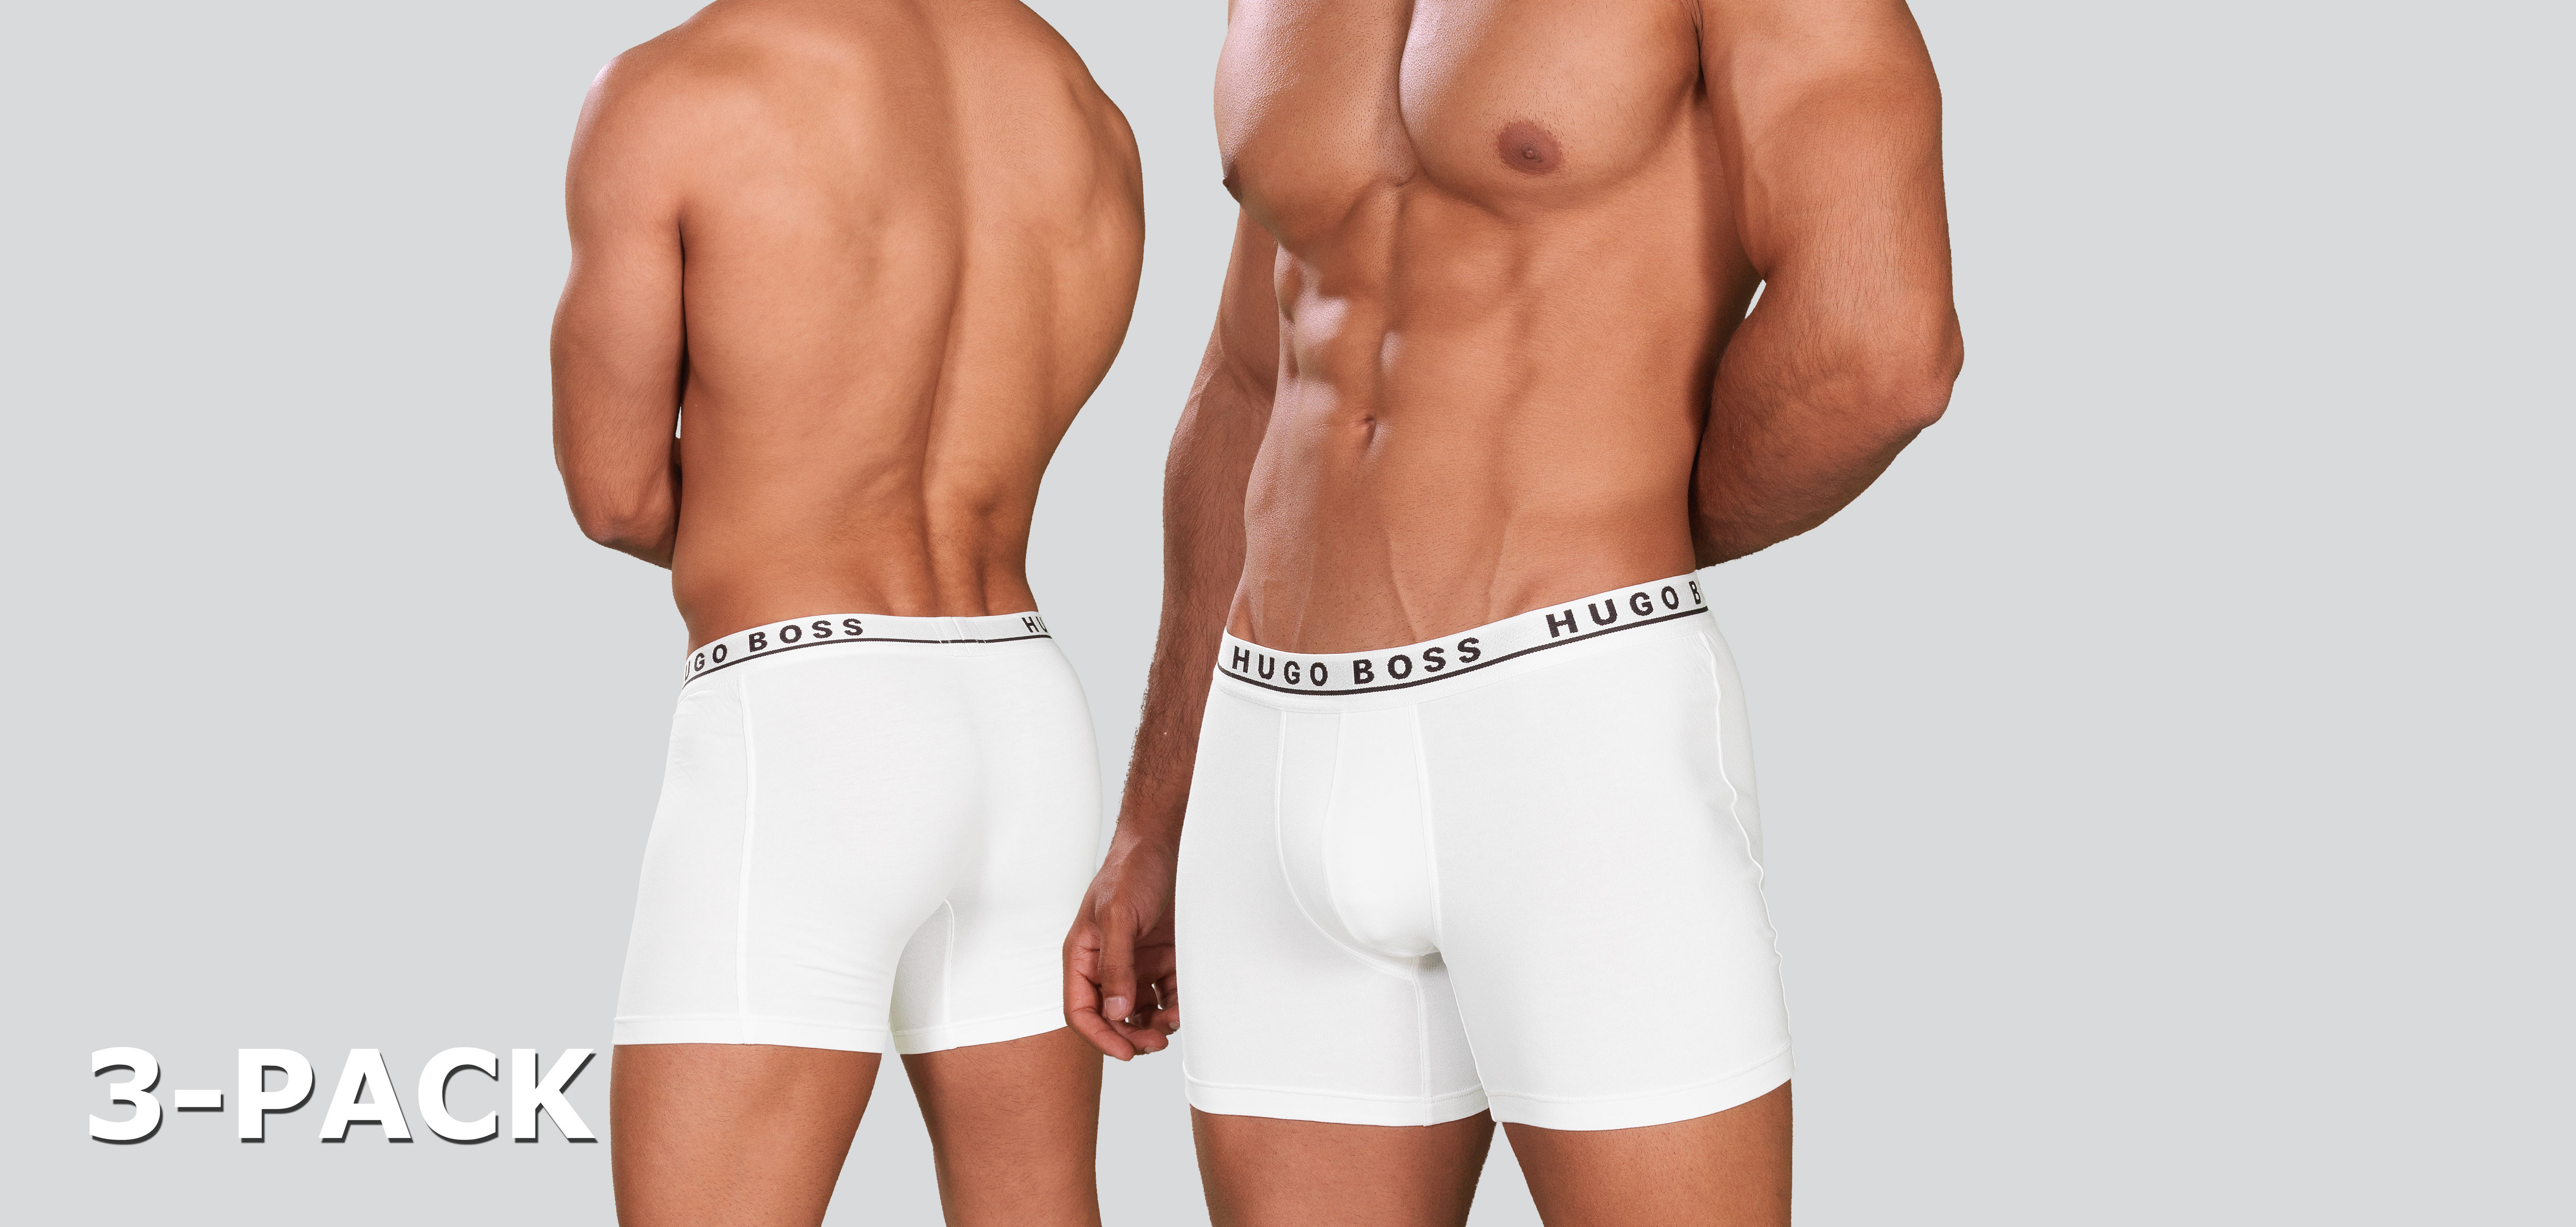 Boss Boxer Brief 3-Pack 404, color Nee